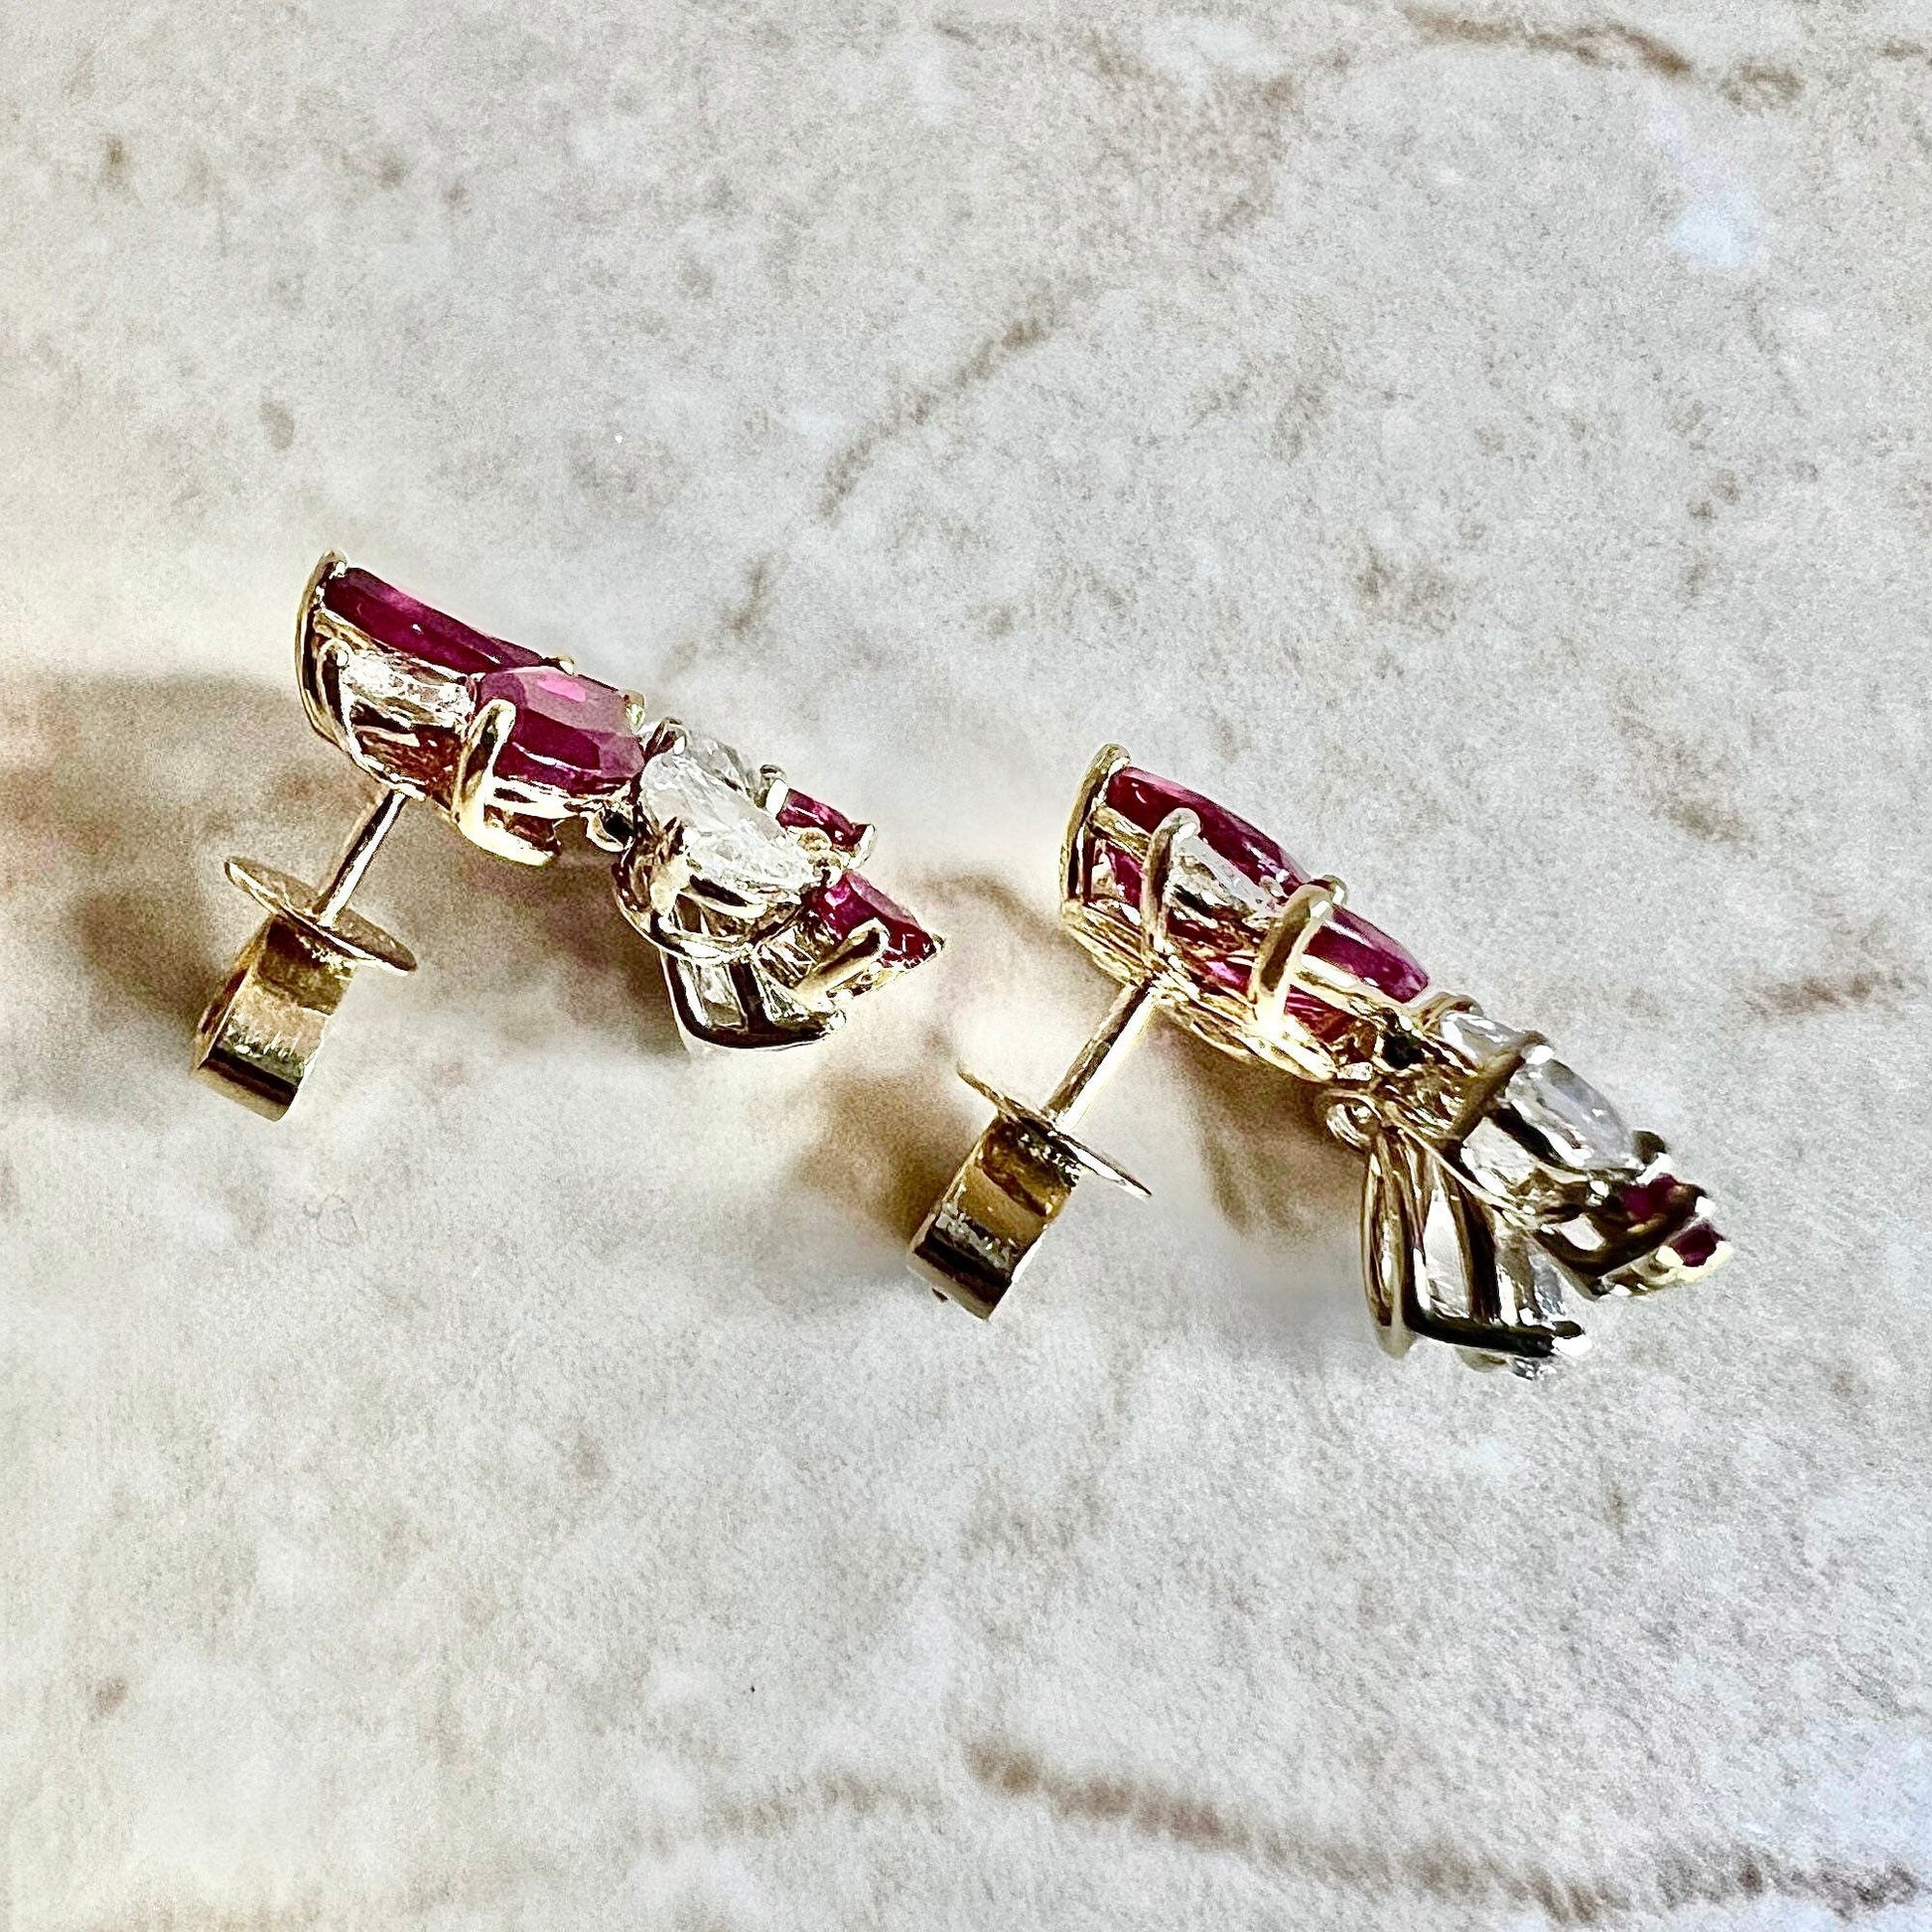 Important Handcrafted 18K Untreated Burmese Ruby & Diamond Earrings By Carvin French - Yellow Gold Ruby Earrings - Ruby Cluster Earrings